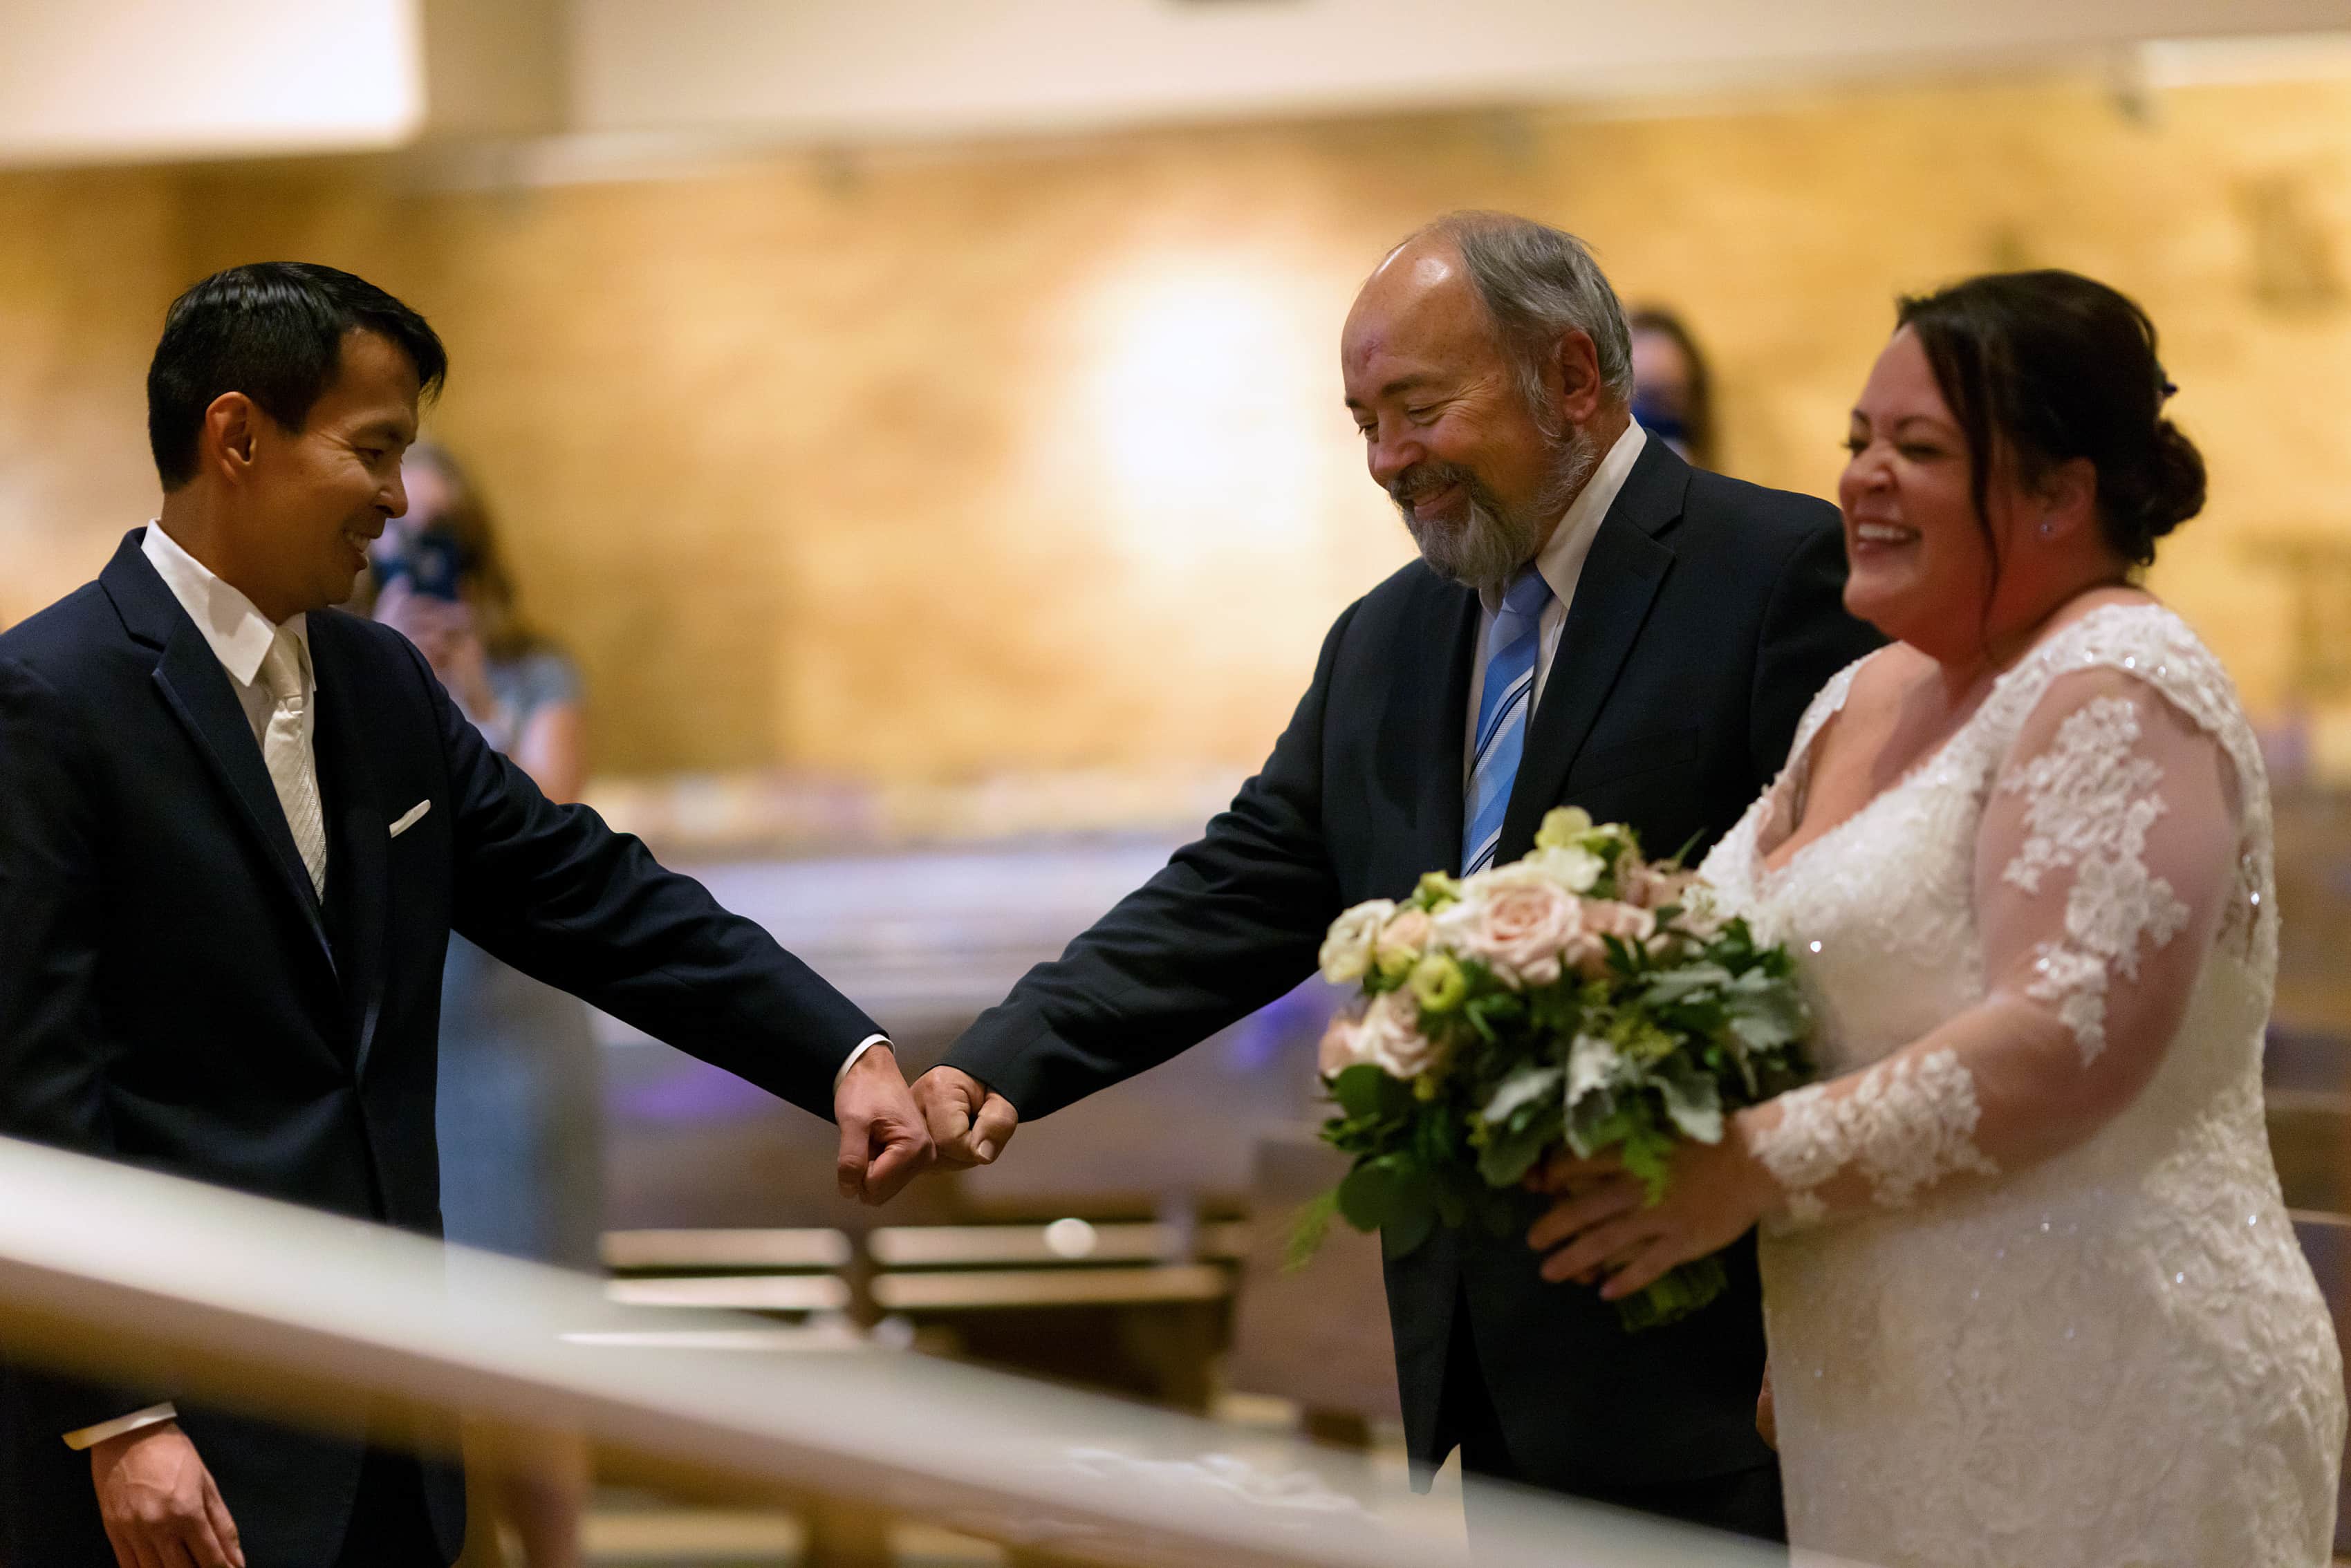 bride walks down the aisle with her father during wedding at st. scholastica parish